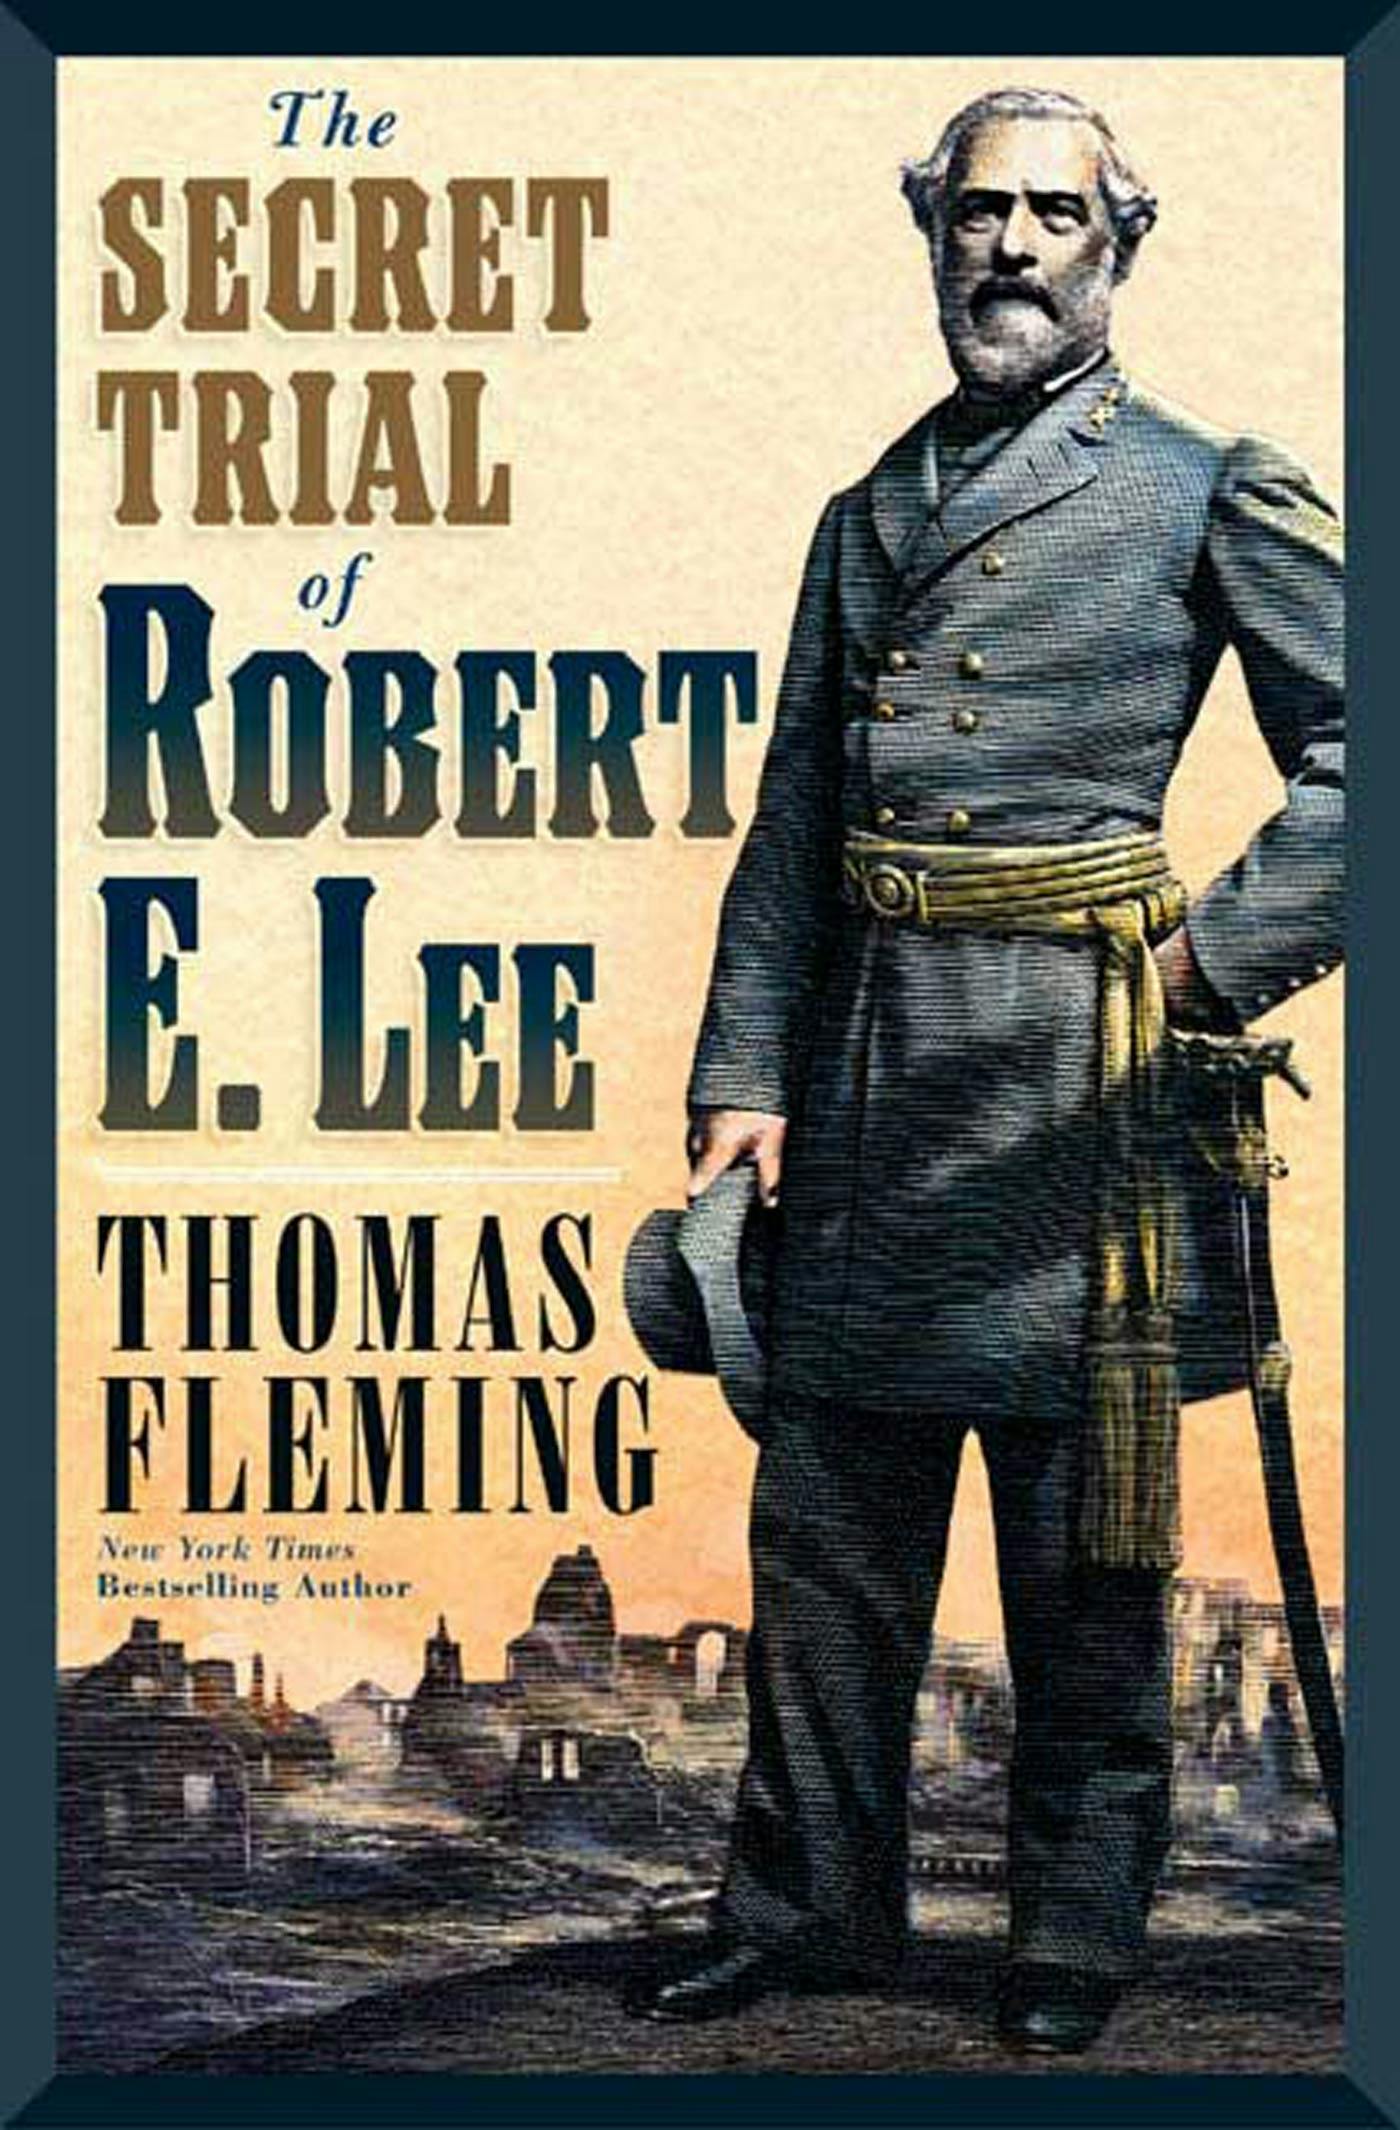 Cover for the book titled as: The Secret Trial of Robert E. Lee